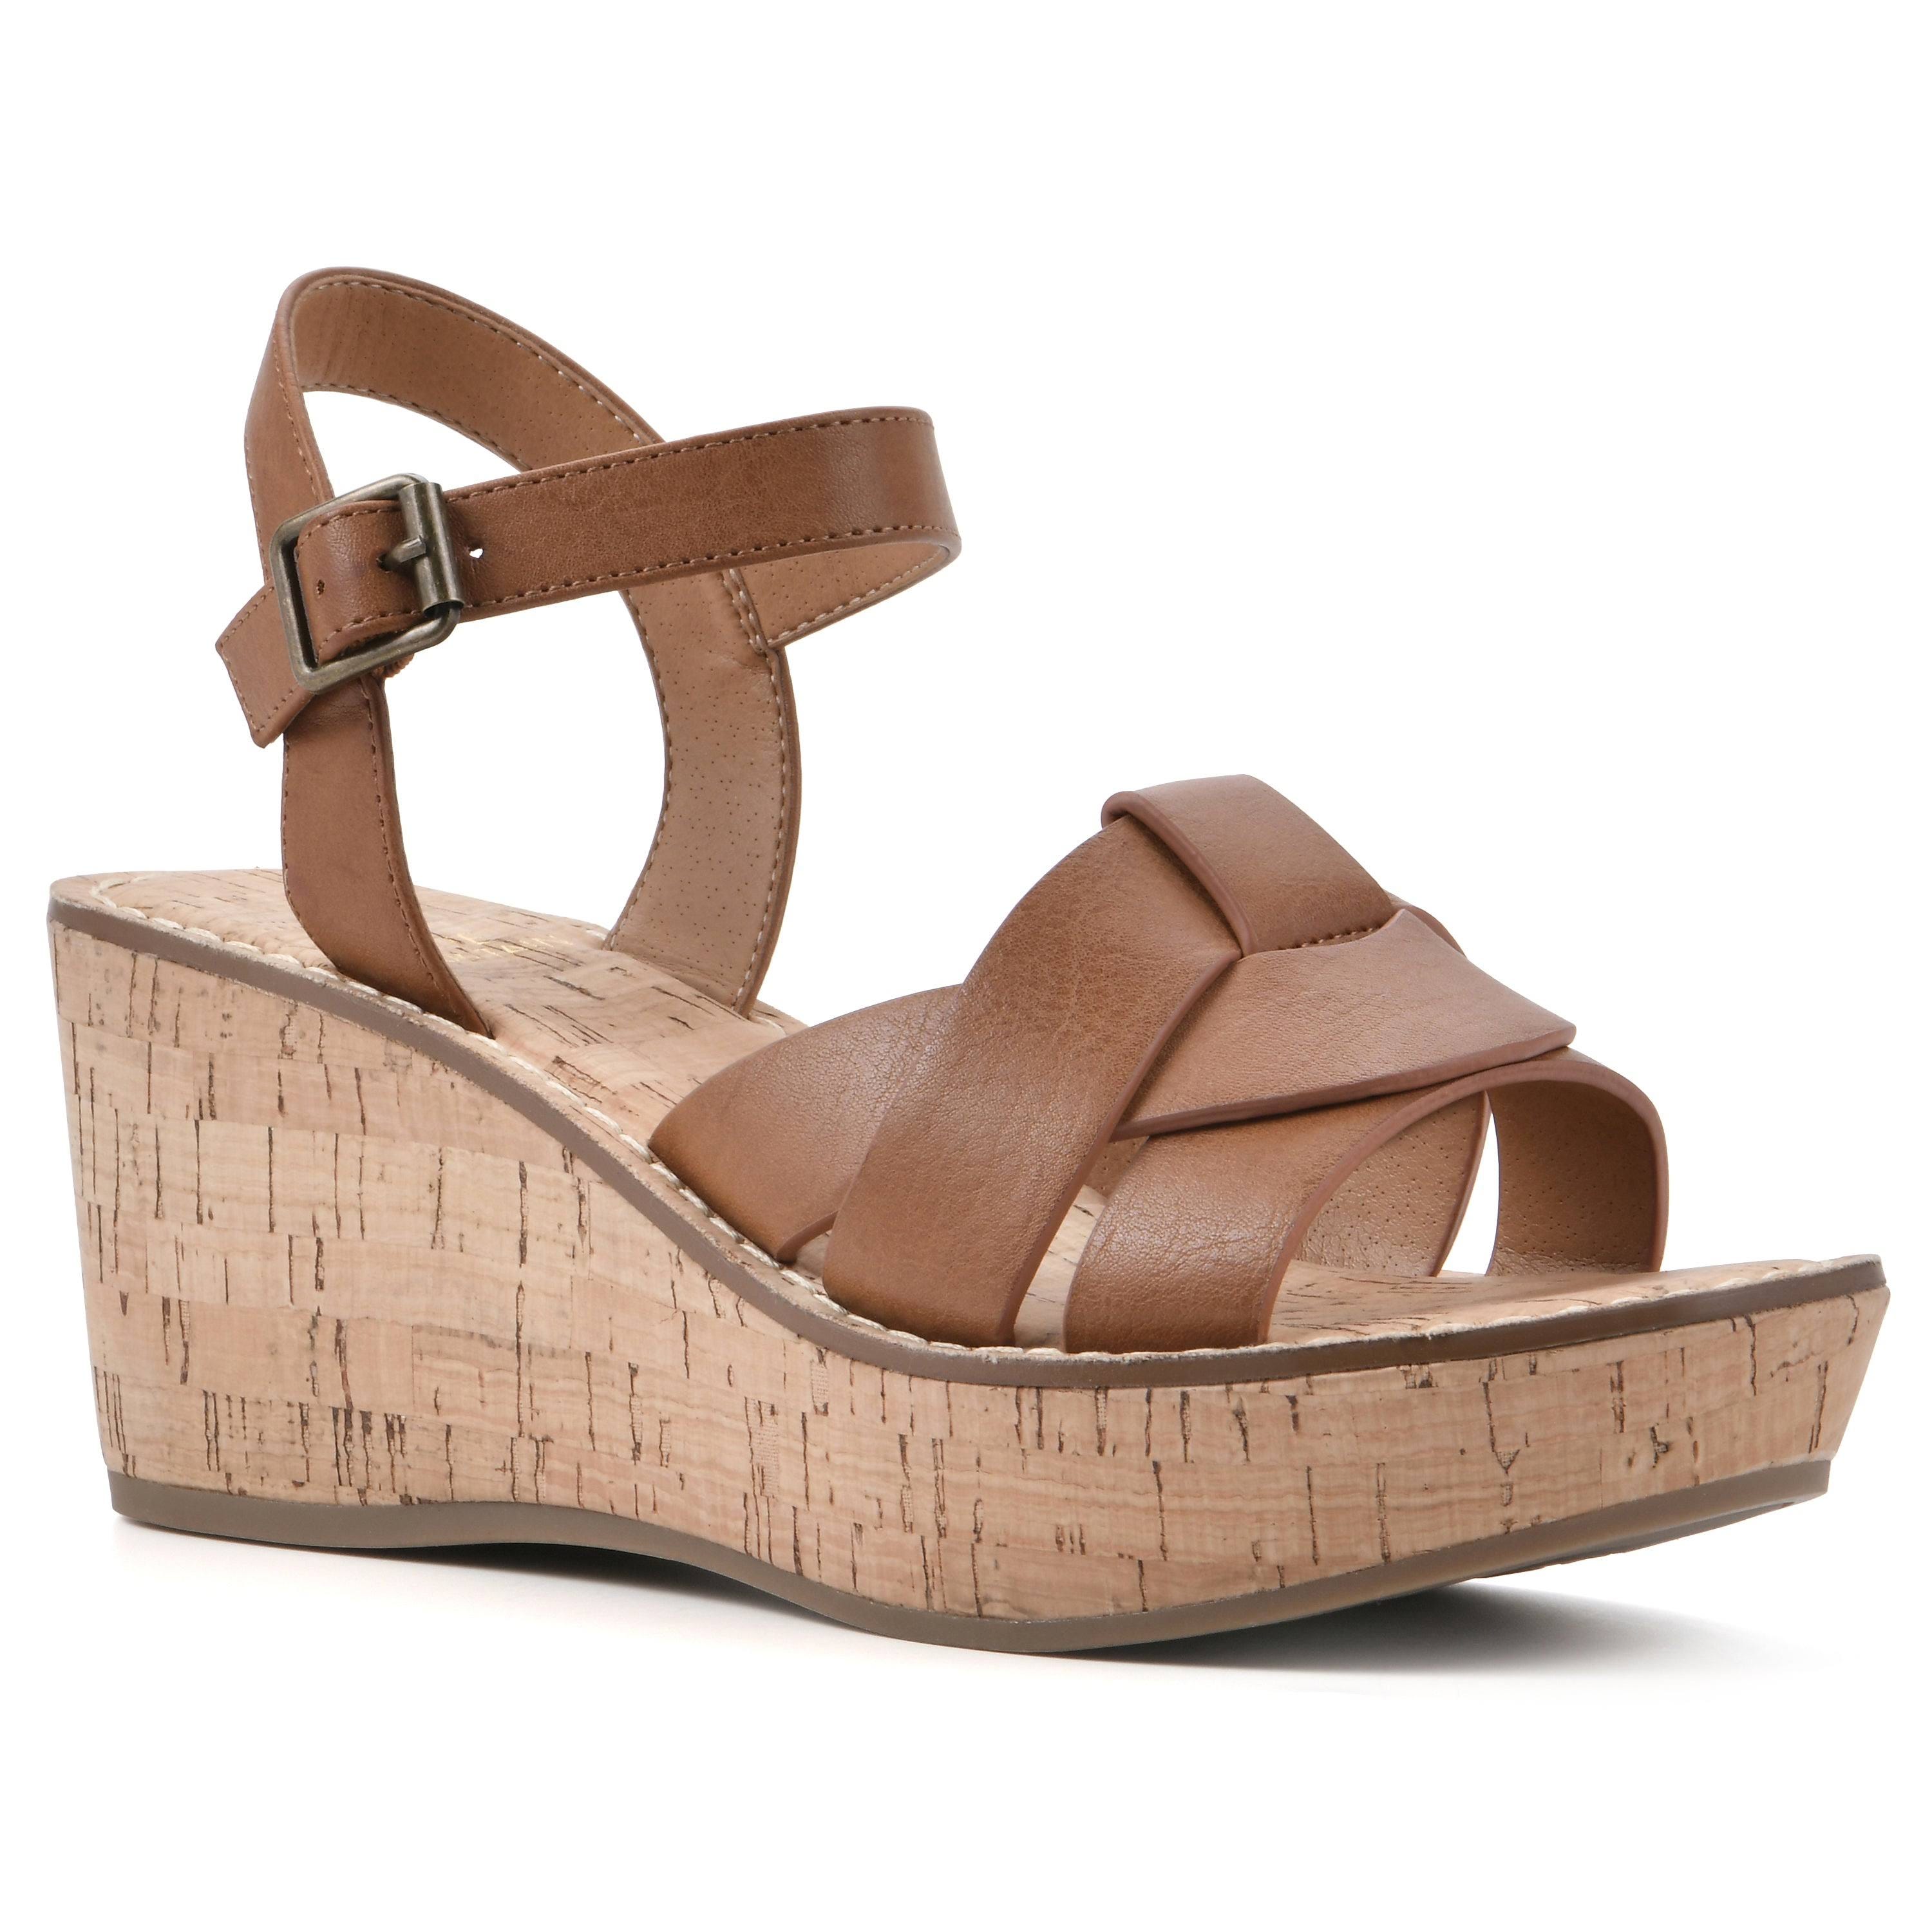 Comfy Tan Women's Sandals with Adjustable Ankle Straps | Image